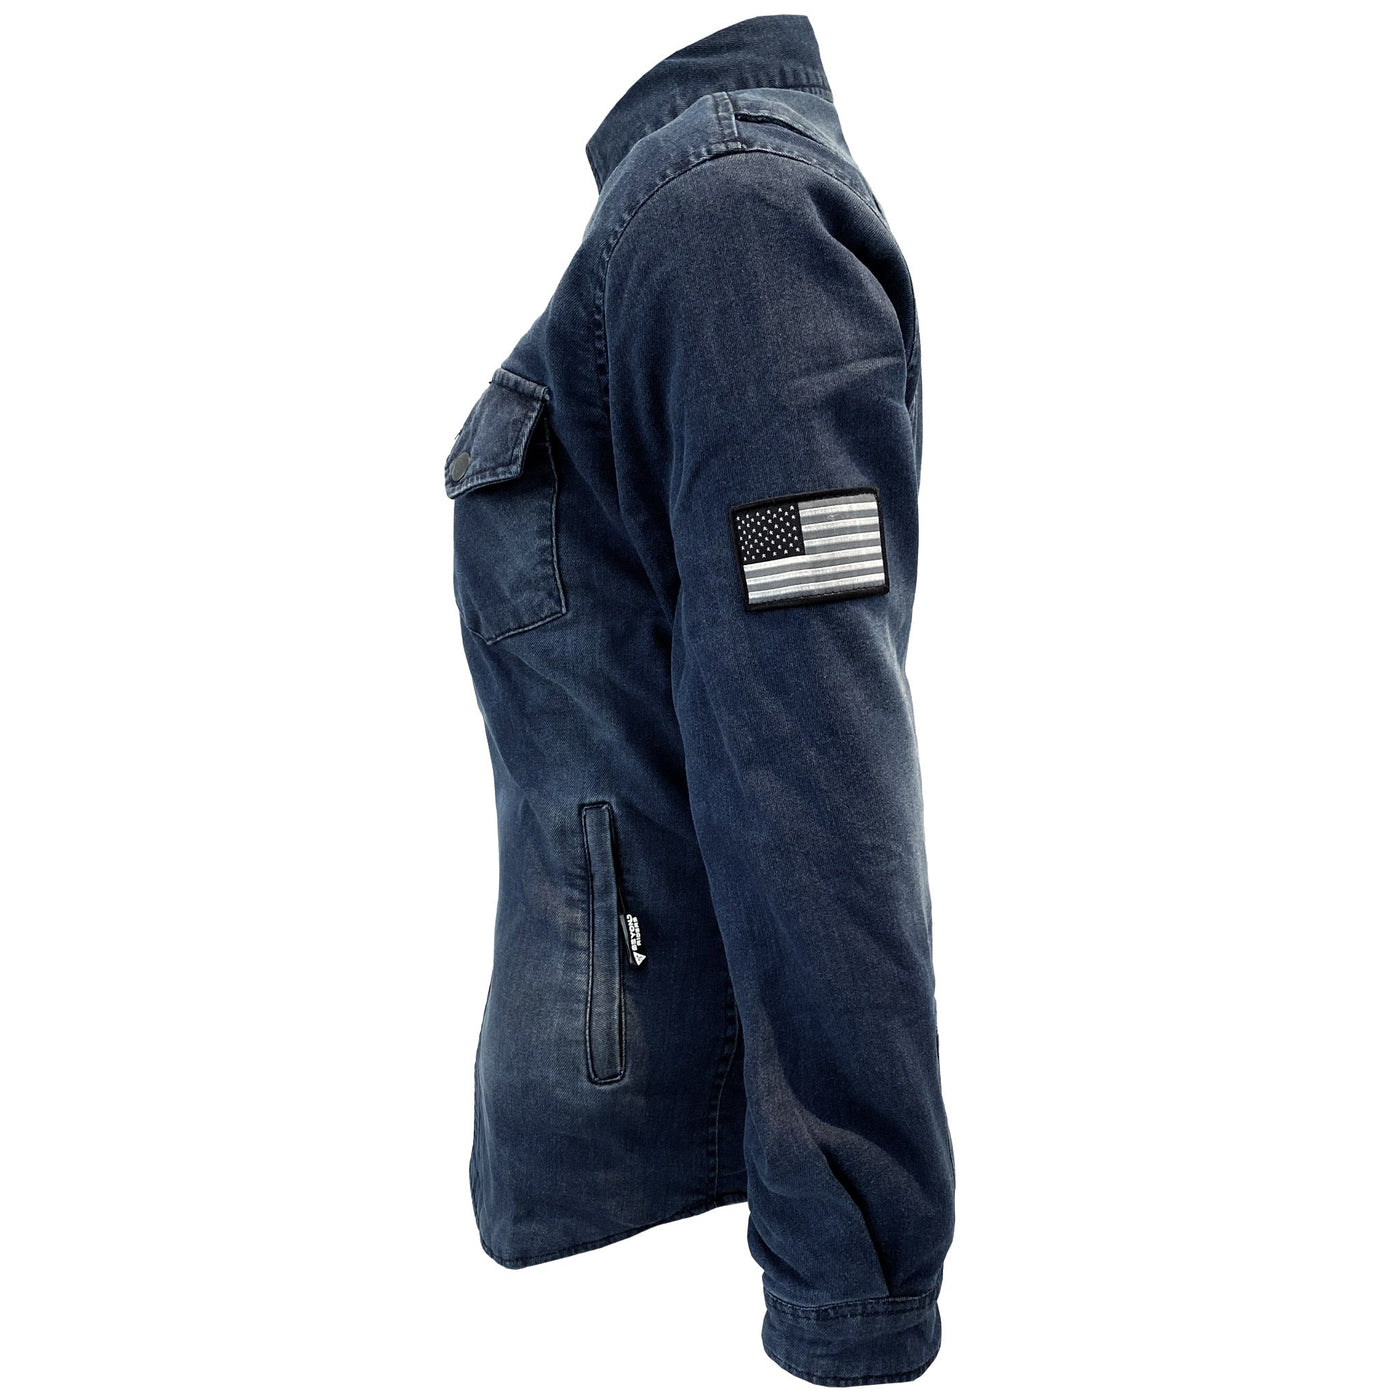 Protective Jeans Jacket with Pads for Women - Faded Blue